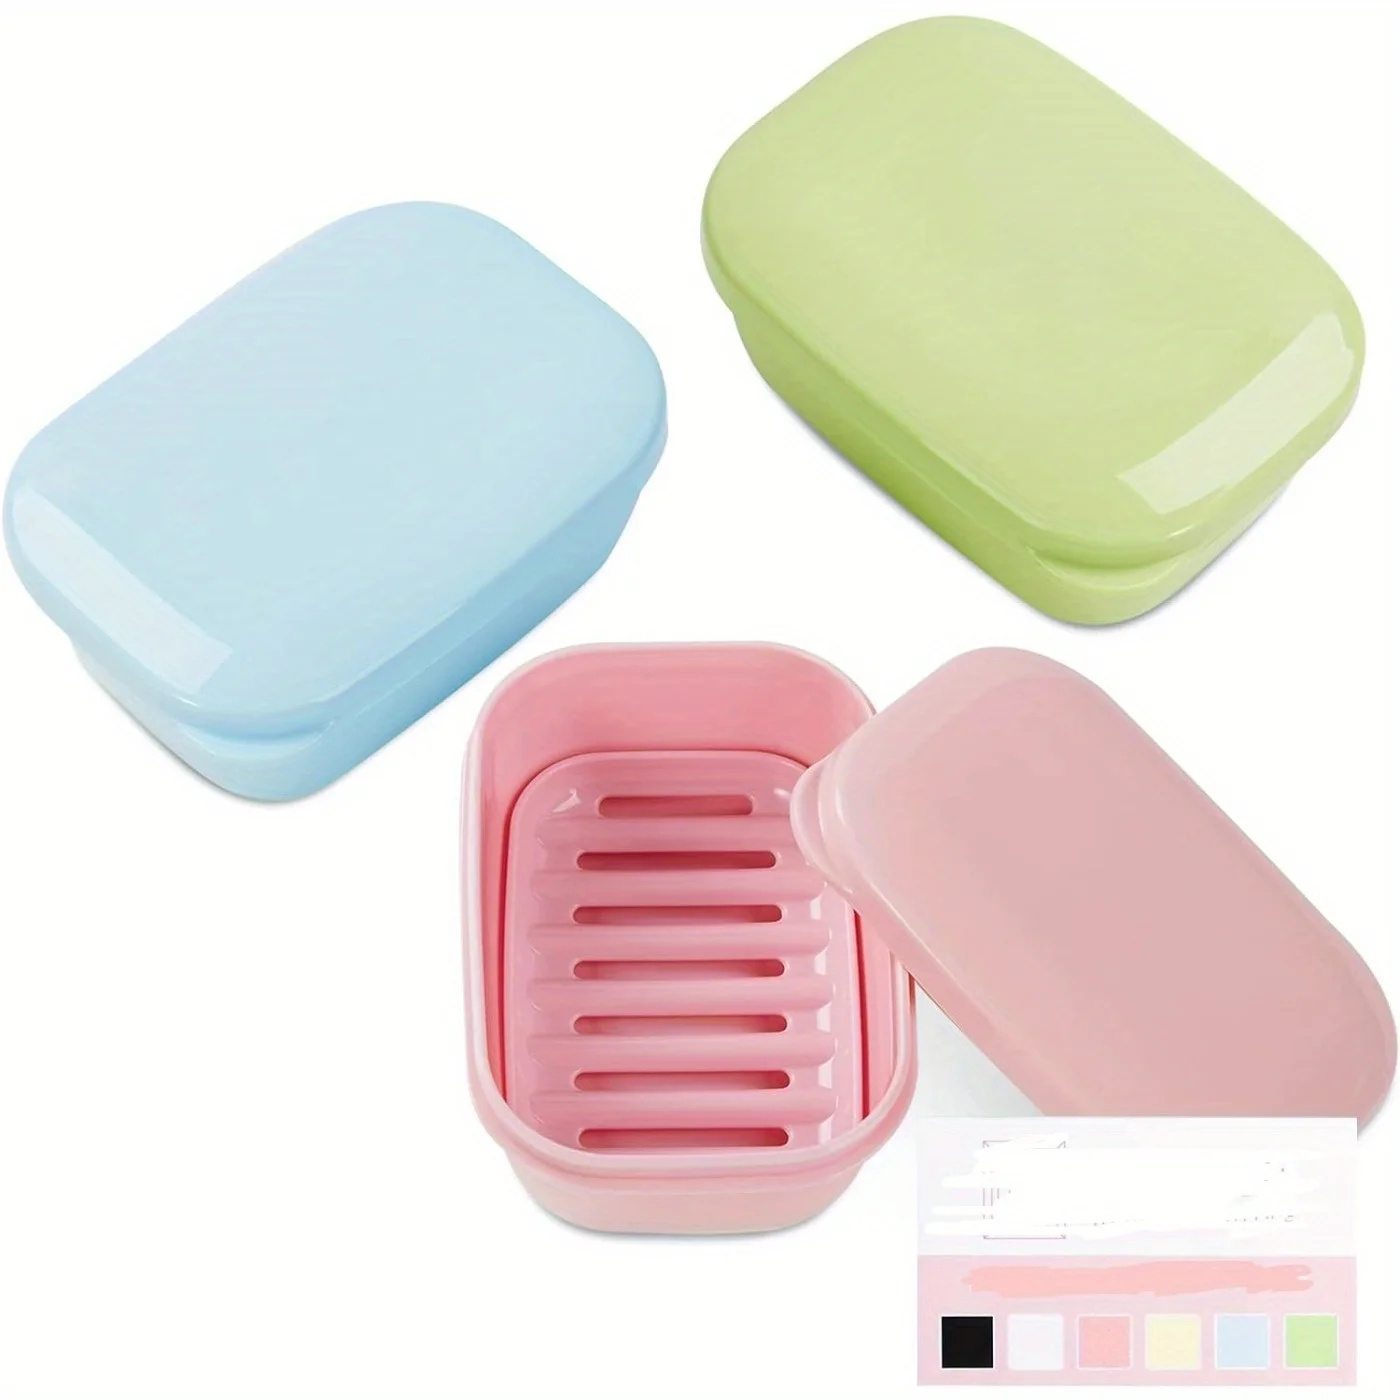 Soap Holder 3 Pcs Travel Soap Container, Portable Bar Soap Case, Leakproof Soap Box, Soap Dishes for Traveling, Camping, Gym